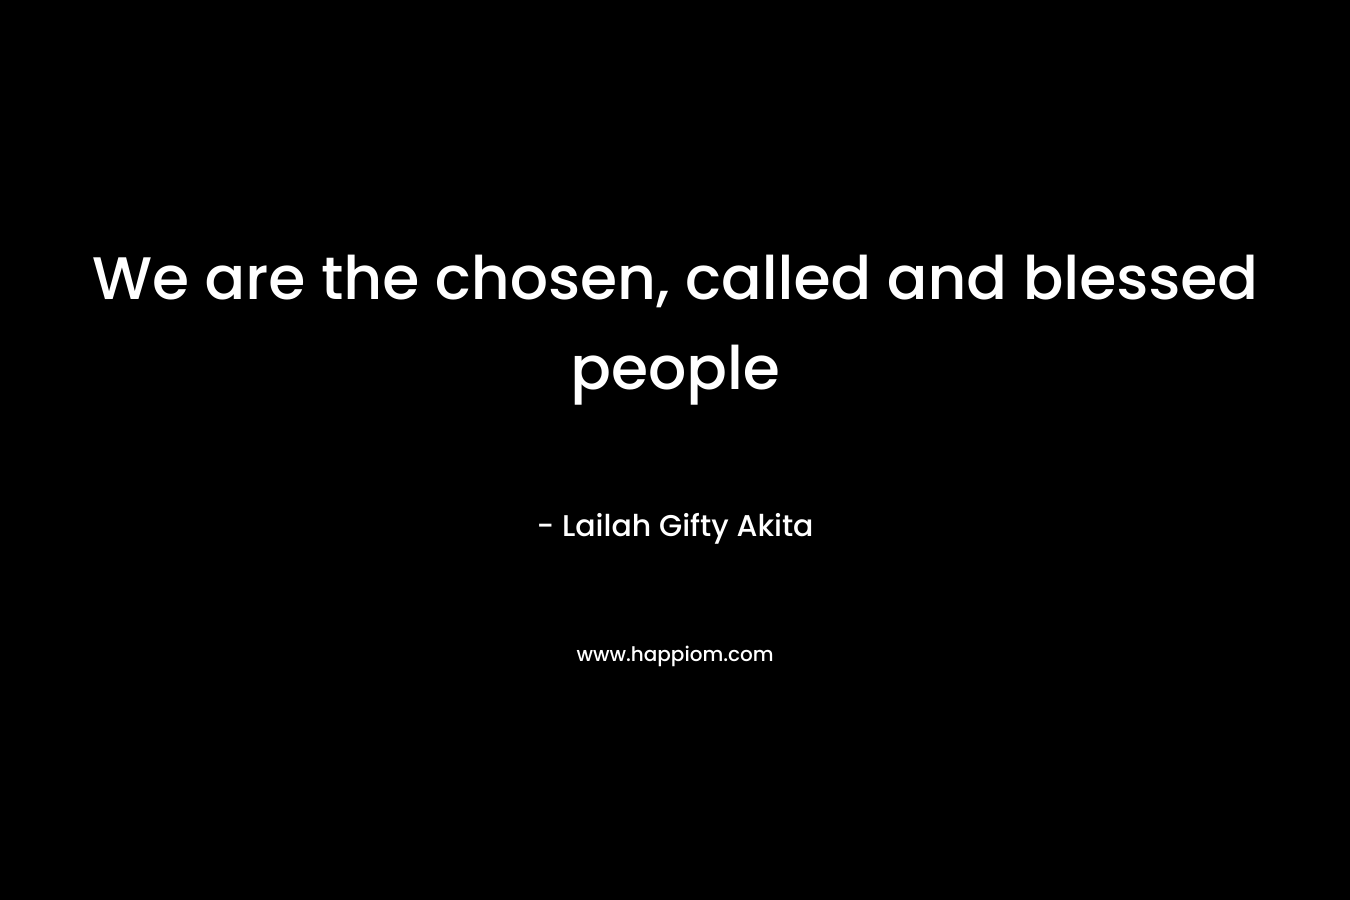 We are the chosen, called and blessed people